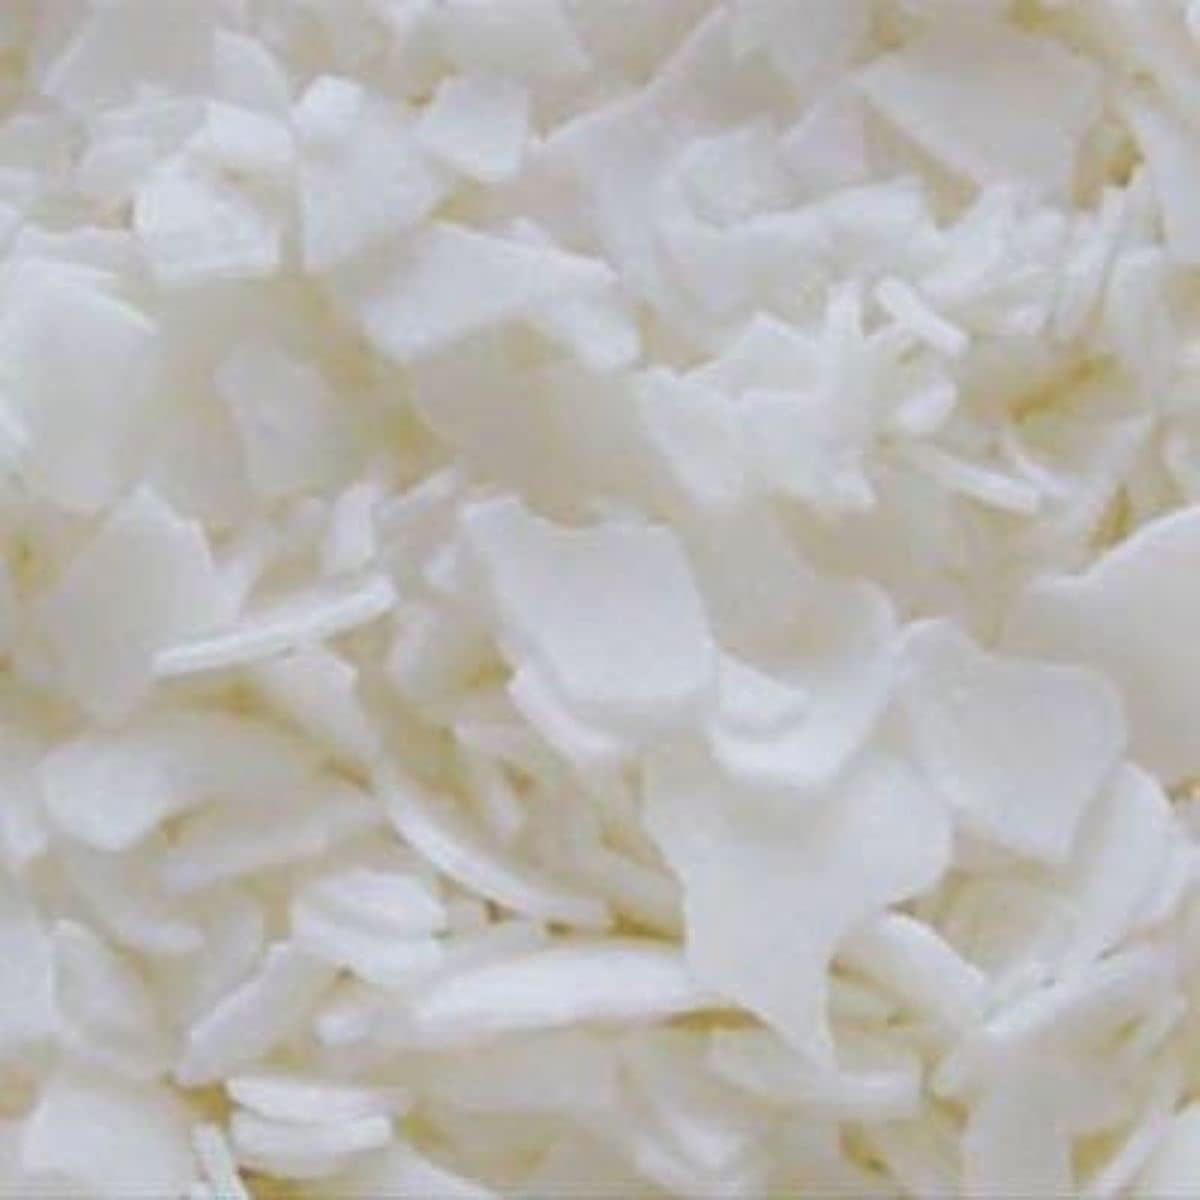 NatureWax C-1 Soy Flakes - 20 LB - Great for Candles, Clamshell Tarts, Snap Bars and Wickless Candles